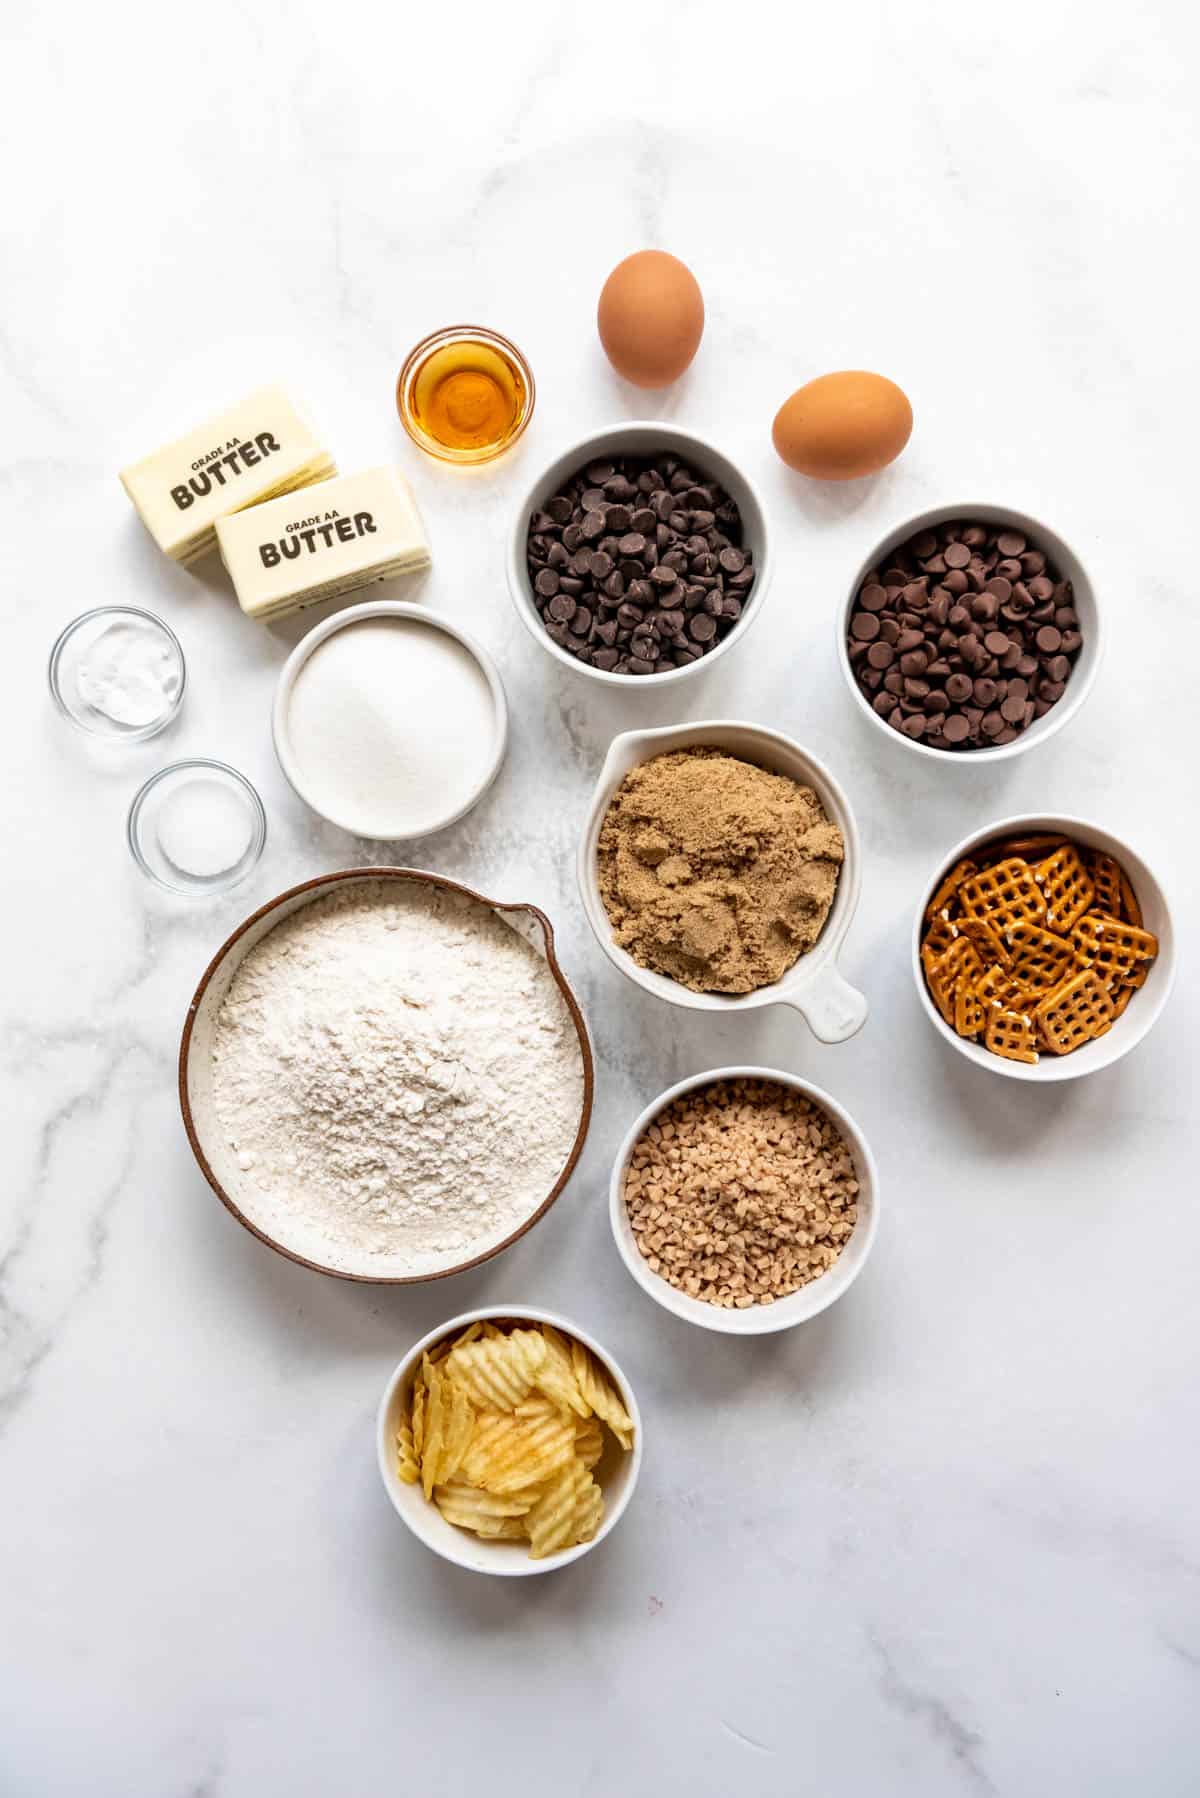 Top view of ingredients needed to make kitchen sink cookies in small bowls on a white surface.